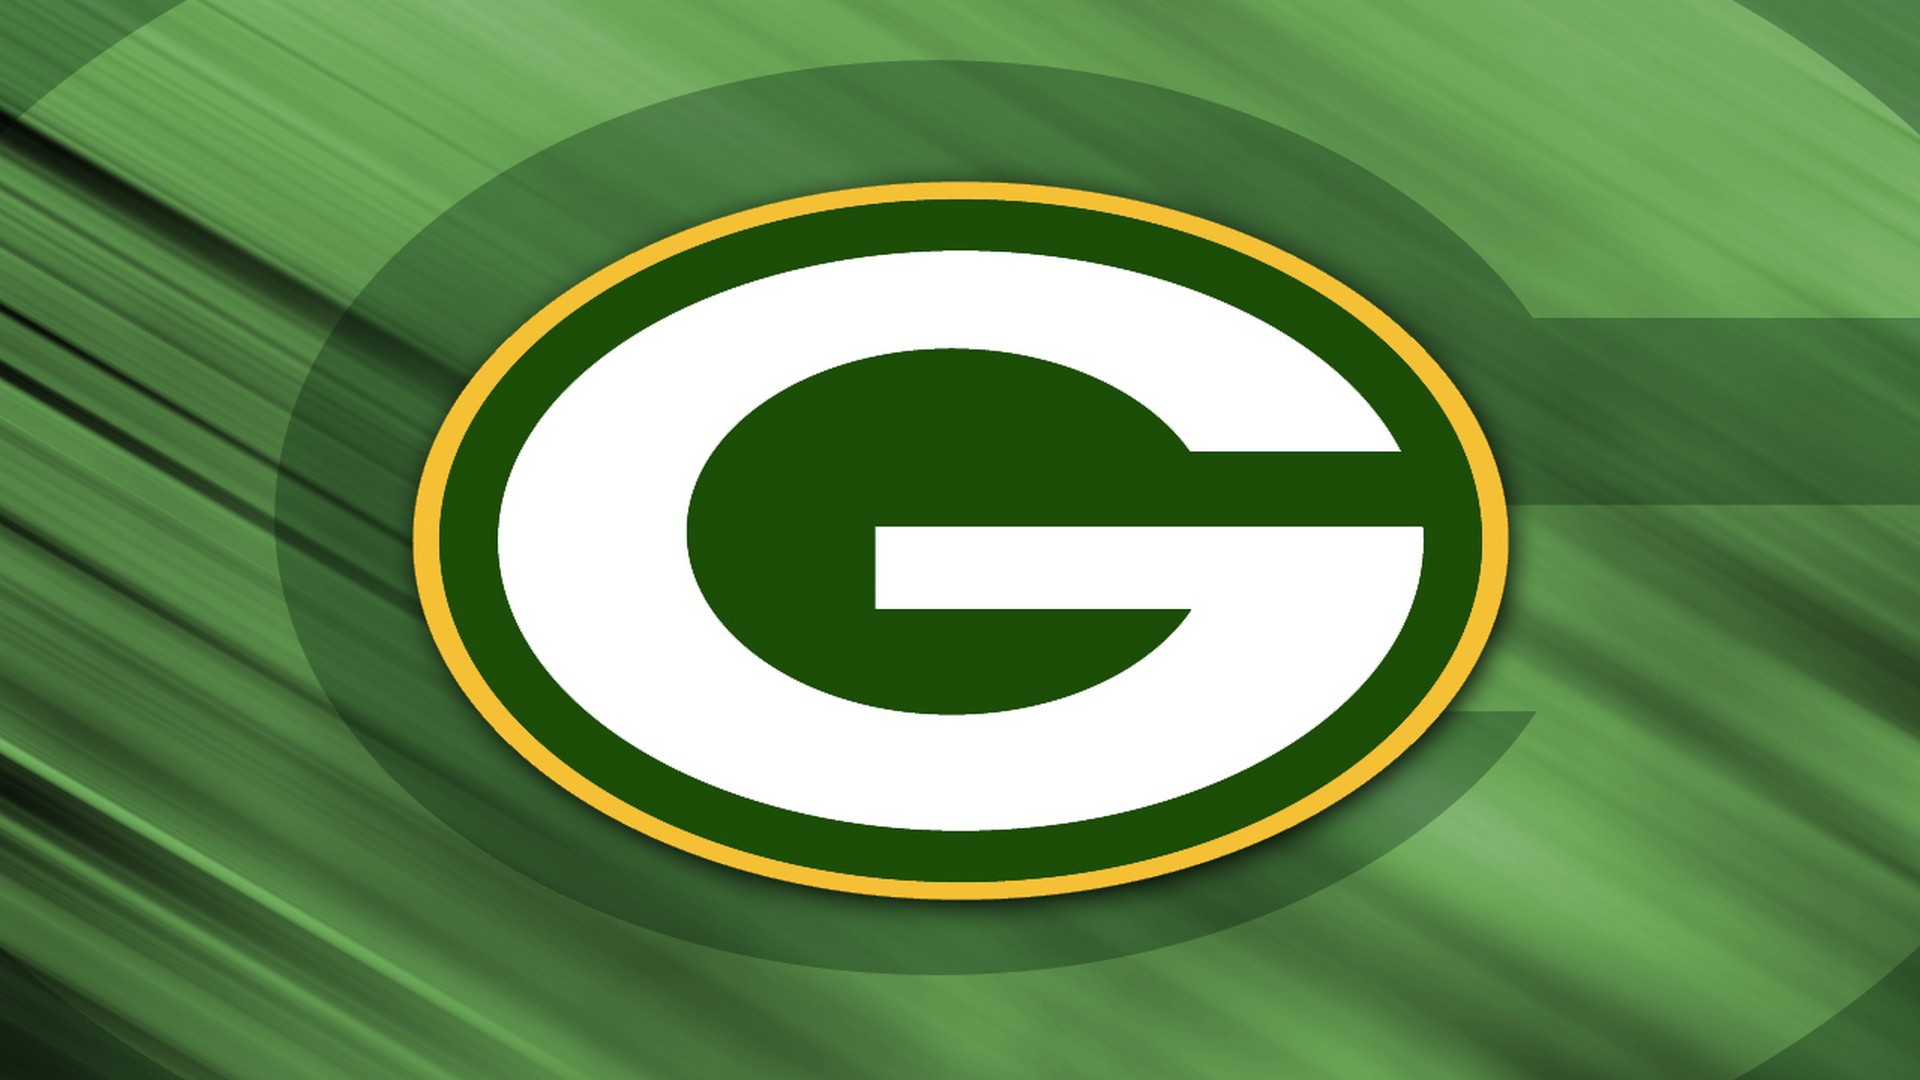 Best Green Bay Packers Wallpaper with high-resolution 1920x1080 pixel. You can use and set as wallpaper for Notebook Screensavers, Mac Wallpapers, Mobile Home Screen, iPhone or Android Phones Lock Screen